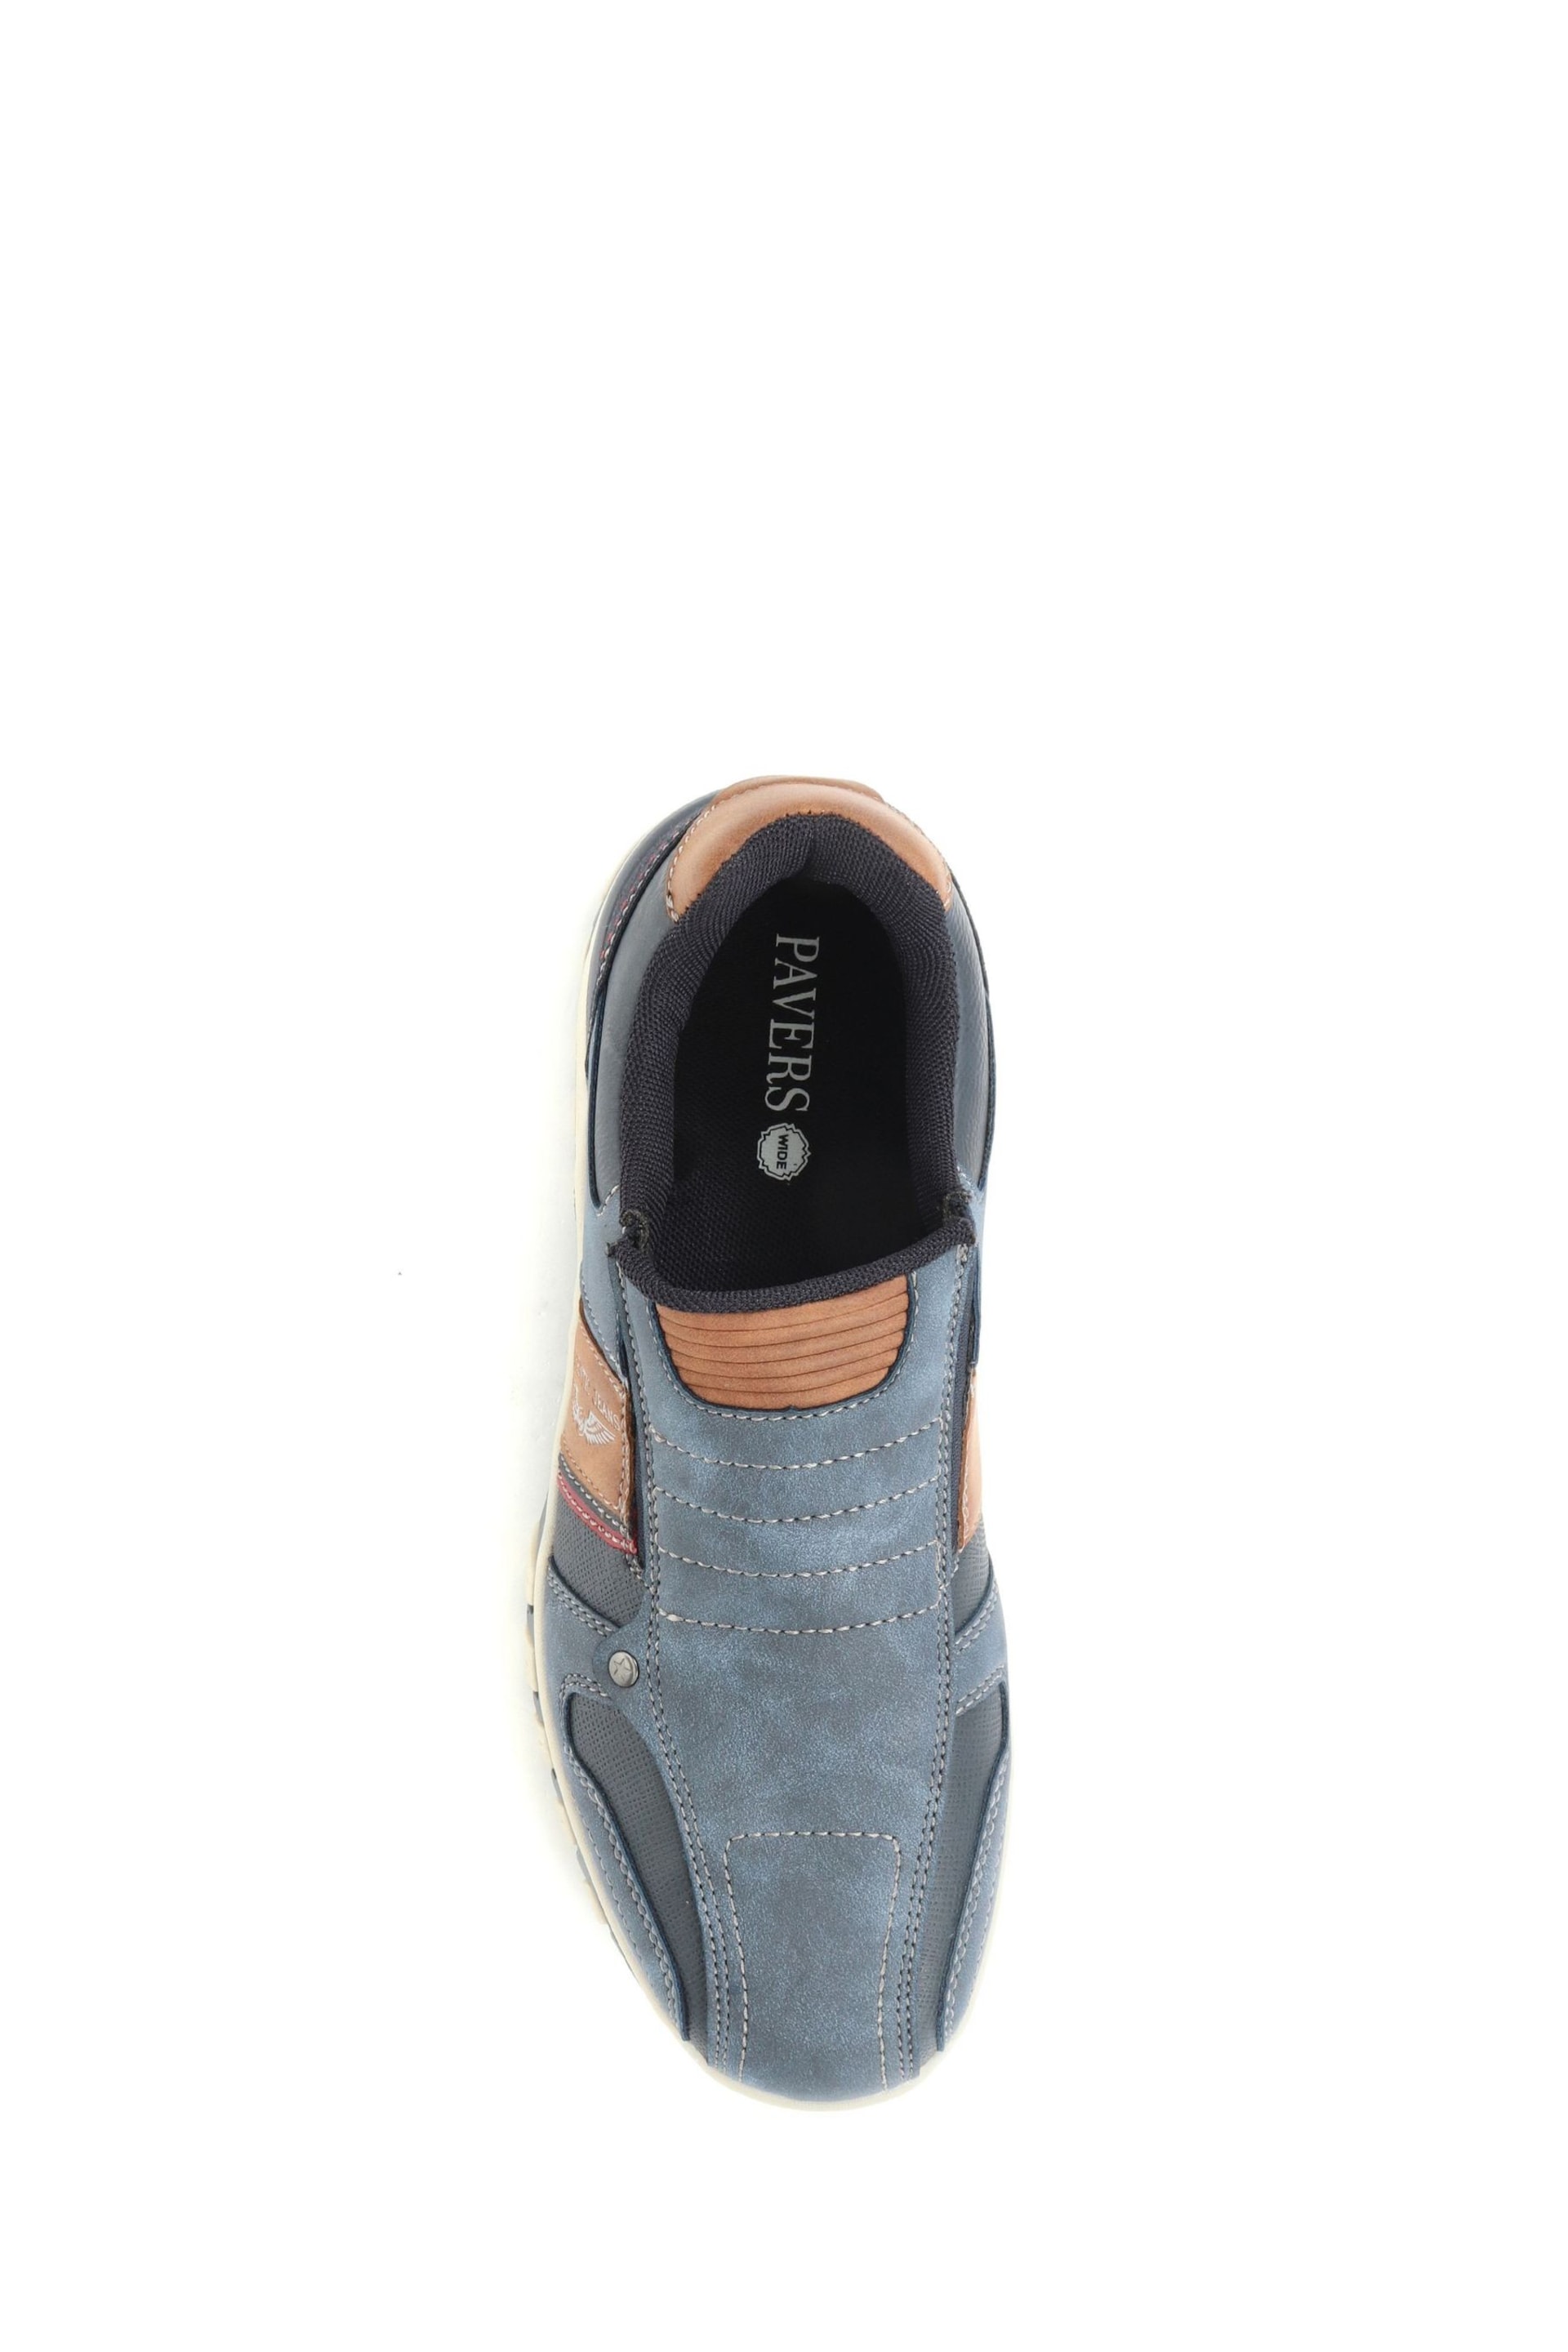 Pavers Wide Fit Mens Slip-On Trainers - Image 4 of 5